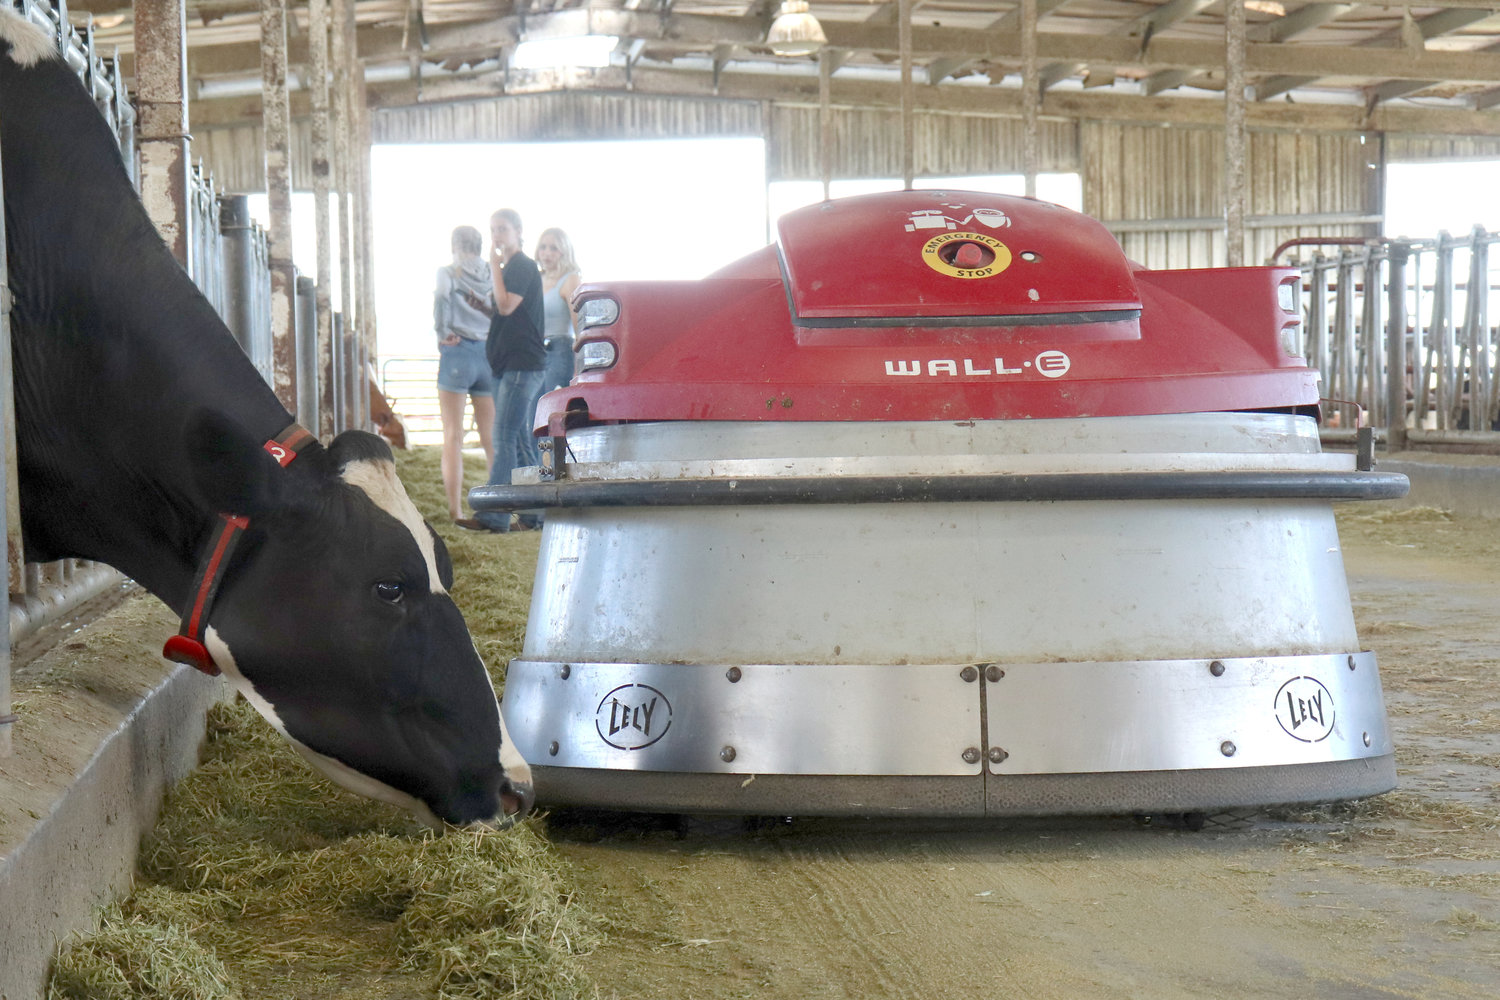 A cow eats hay pushed into reach by the Lely Juno automatic feed pusher, affectionately nicknamed after the Pixar character “WALL-E” by its owners, at Sun-Ton Farms in Adna on Friday.